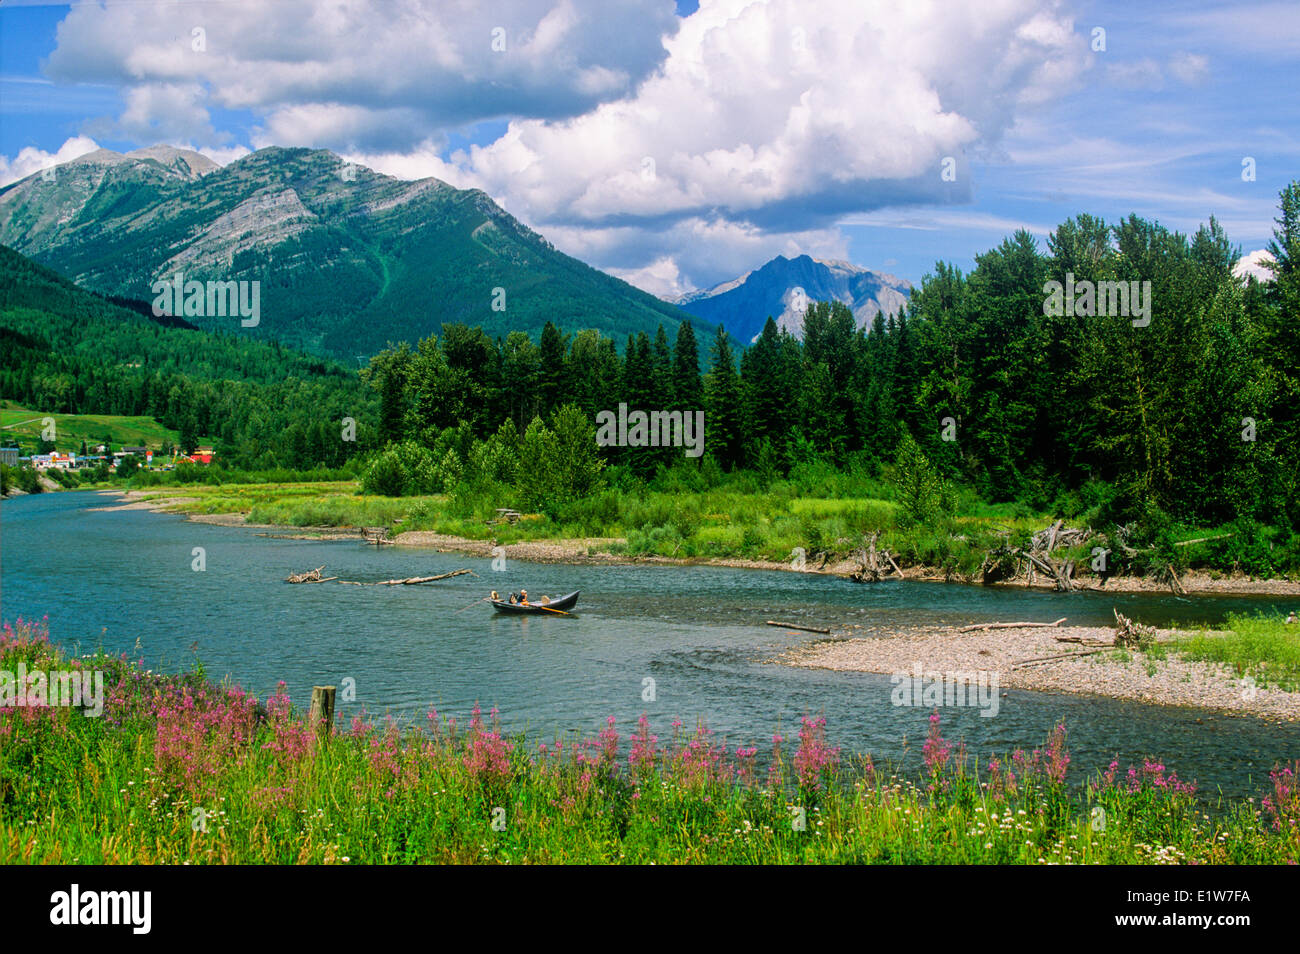 Trout fishing on the Elk River, Fernie, British Columbia, Canada Stock Photo